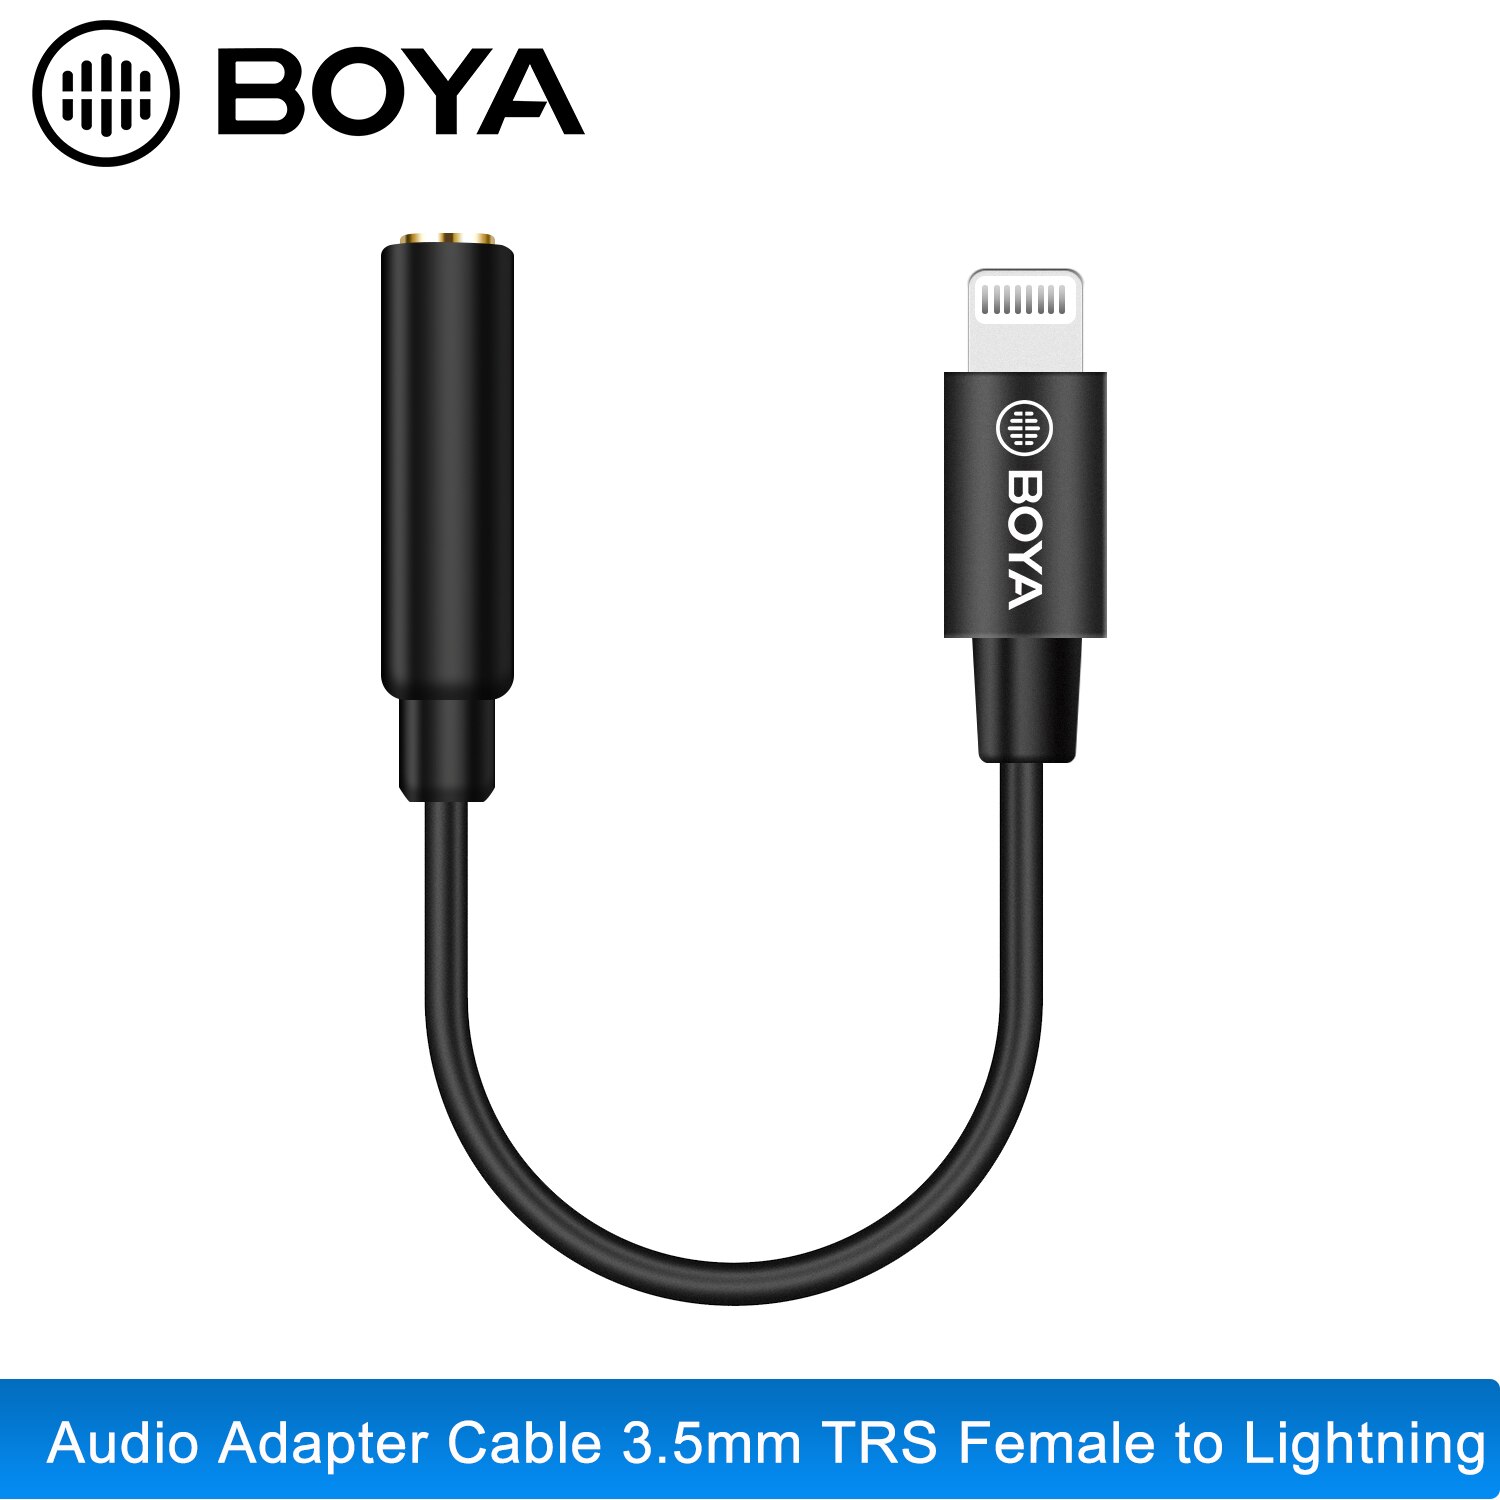 Boya BY-K8 Audio Adapter Kabel 3.5Mm Trs Vrouwelijke Om Lighning Voor Iphone Ipad Ipod Touch Selfpowered Camera Microfoon Accessoires